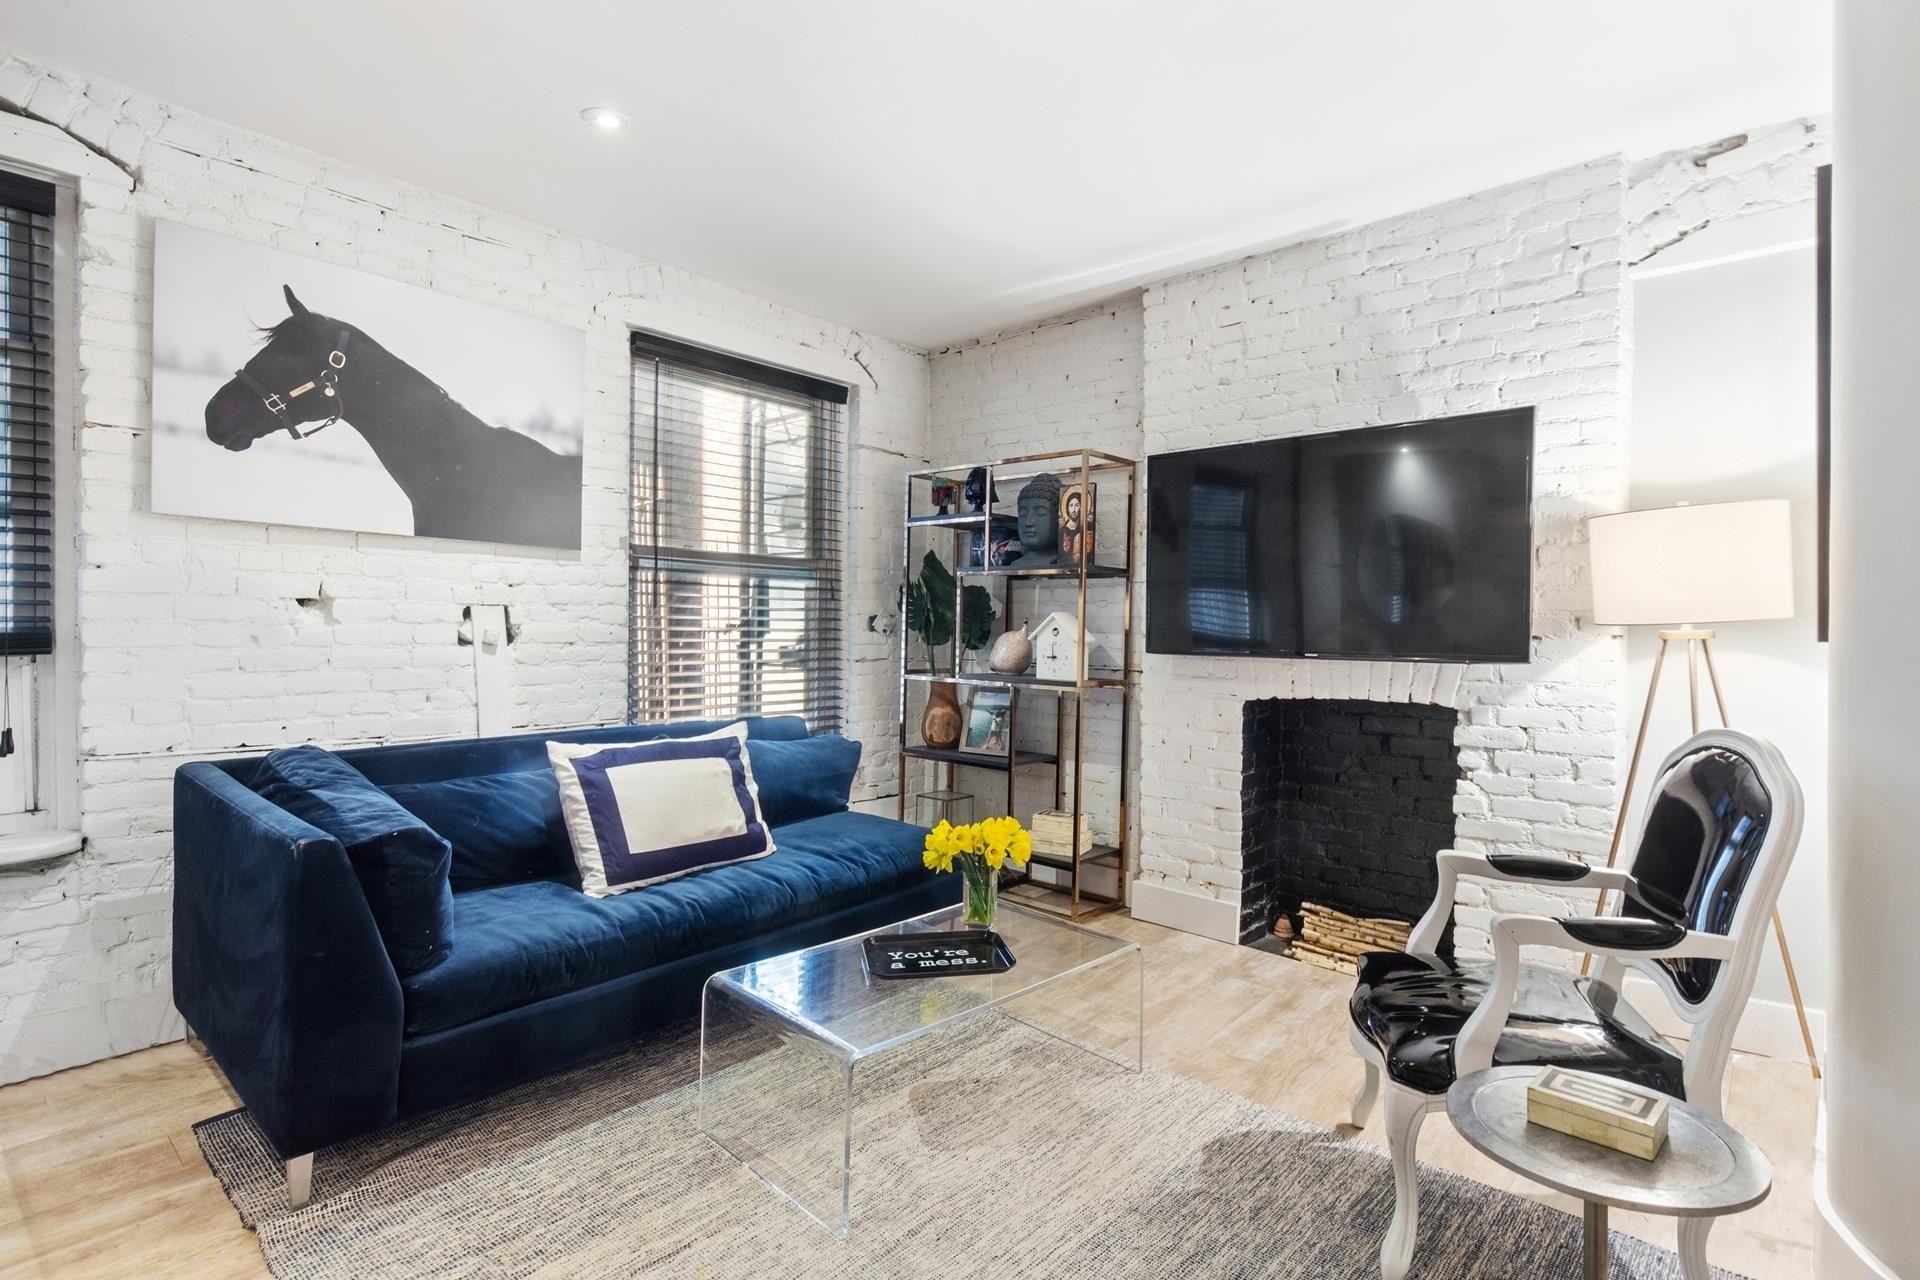 Co-op Properties for Sale at 328 W 17TH ST, 2R Chelsea, New York, New York 10011